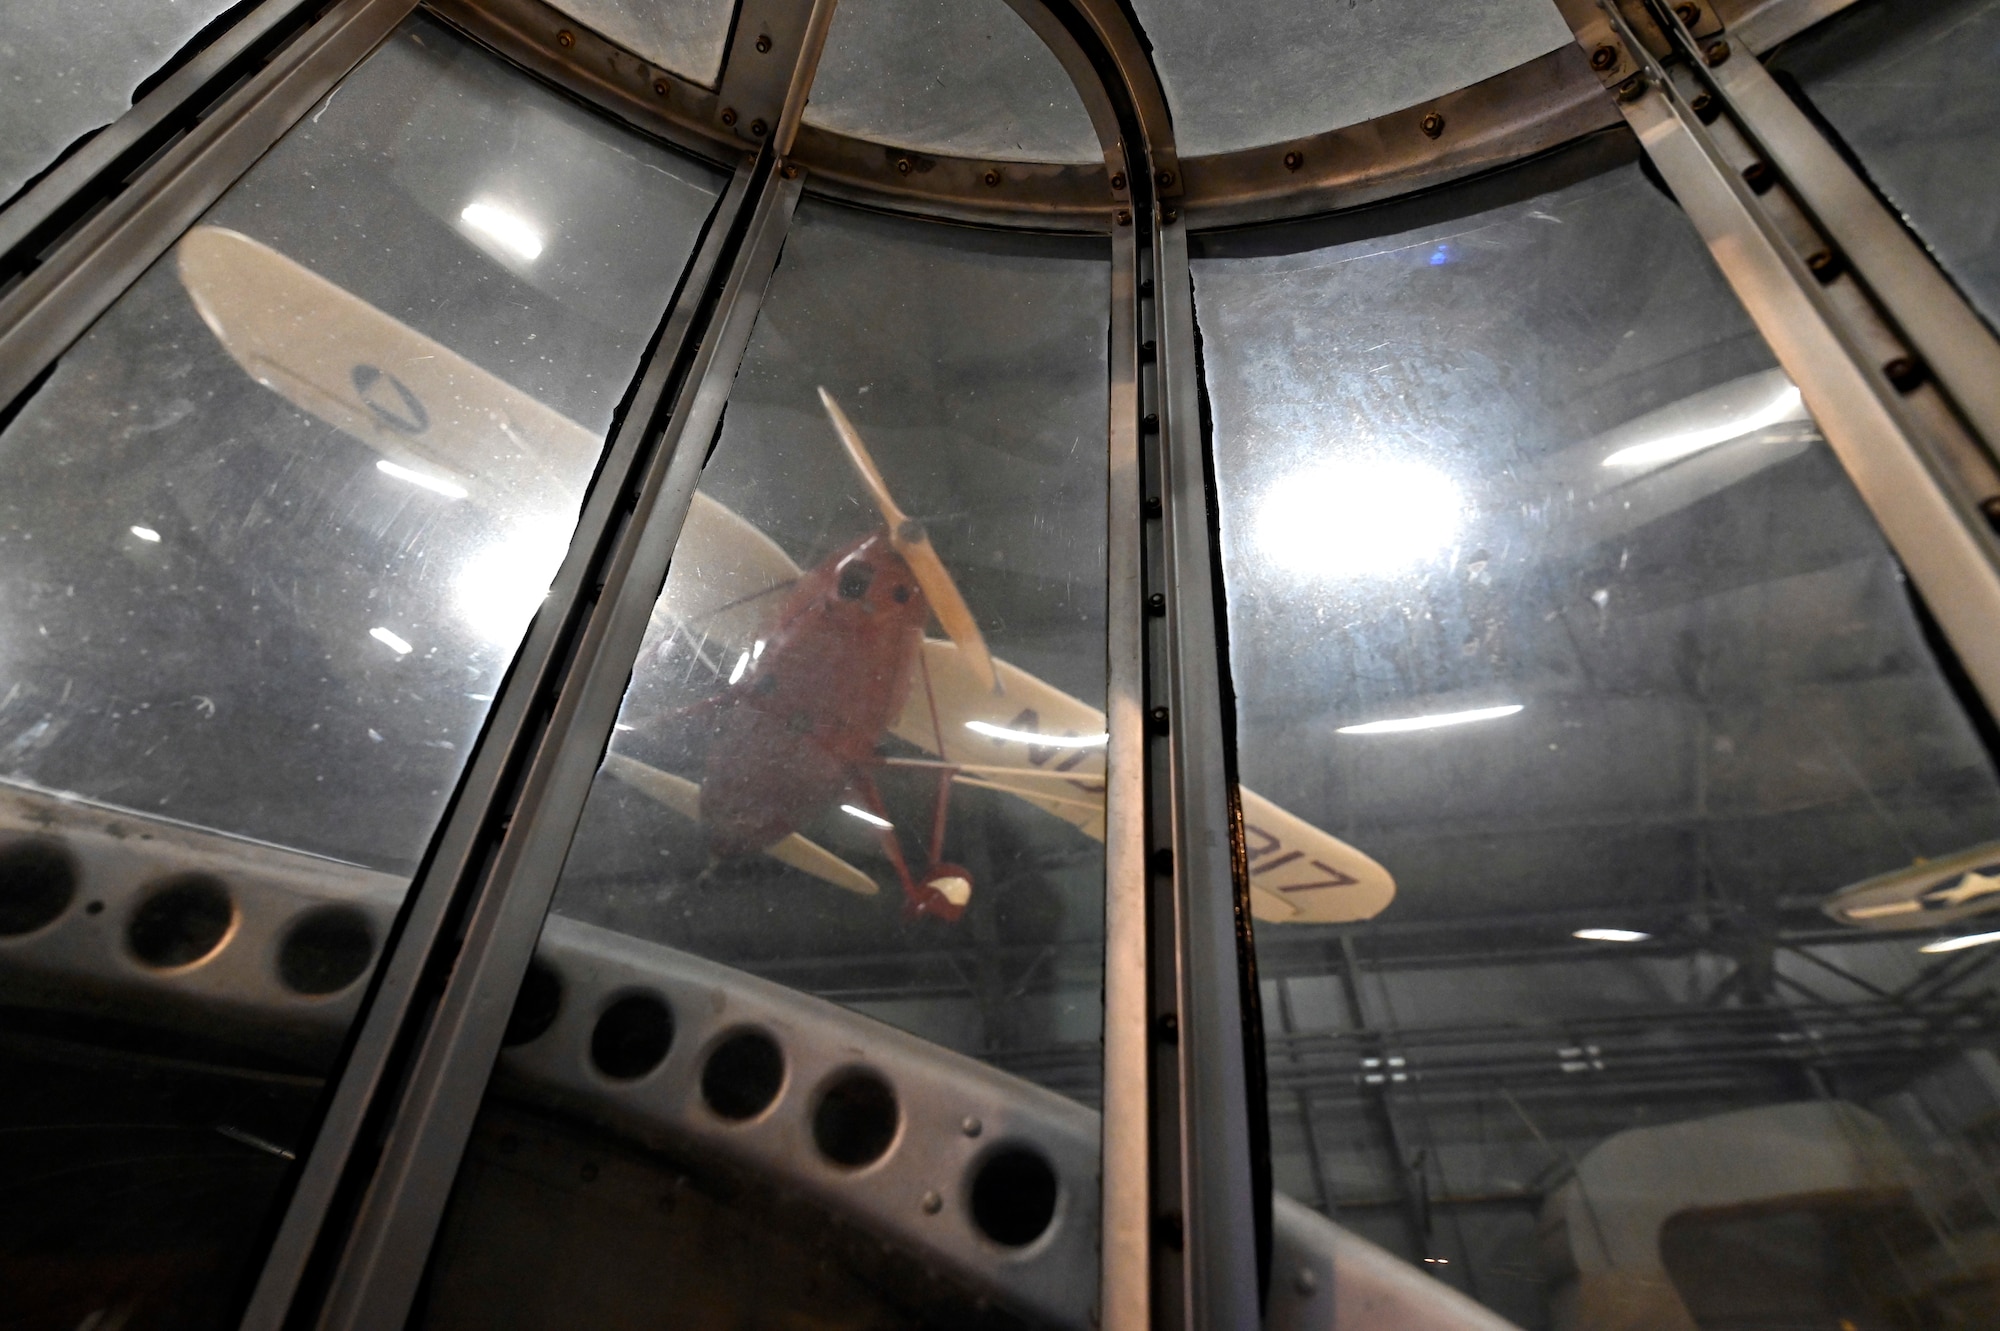 Interior views of the Douglas B-18 Bolo bomber on display at the National Museum of the U.S. Air Force